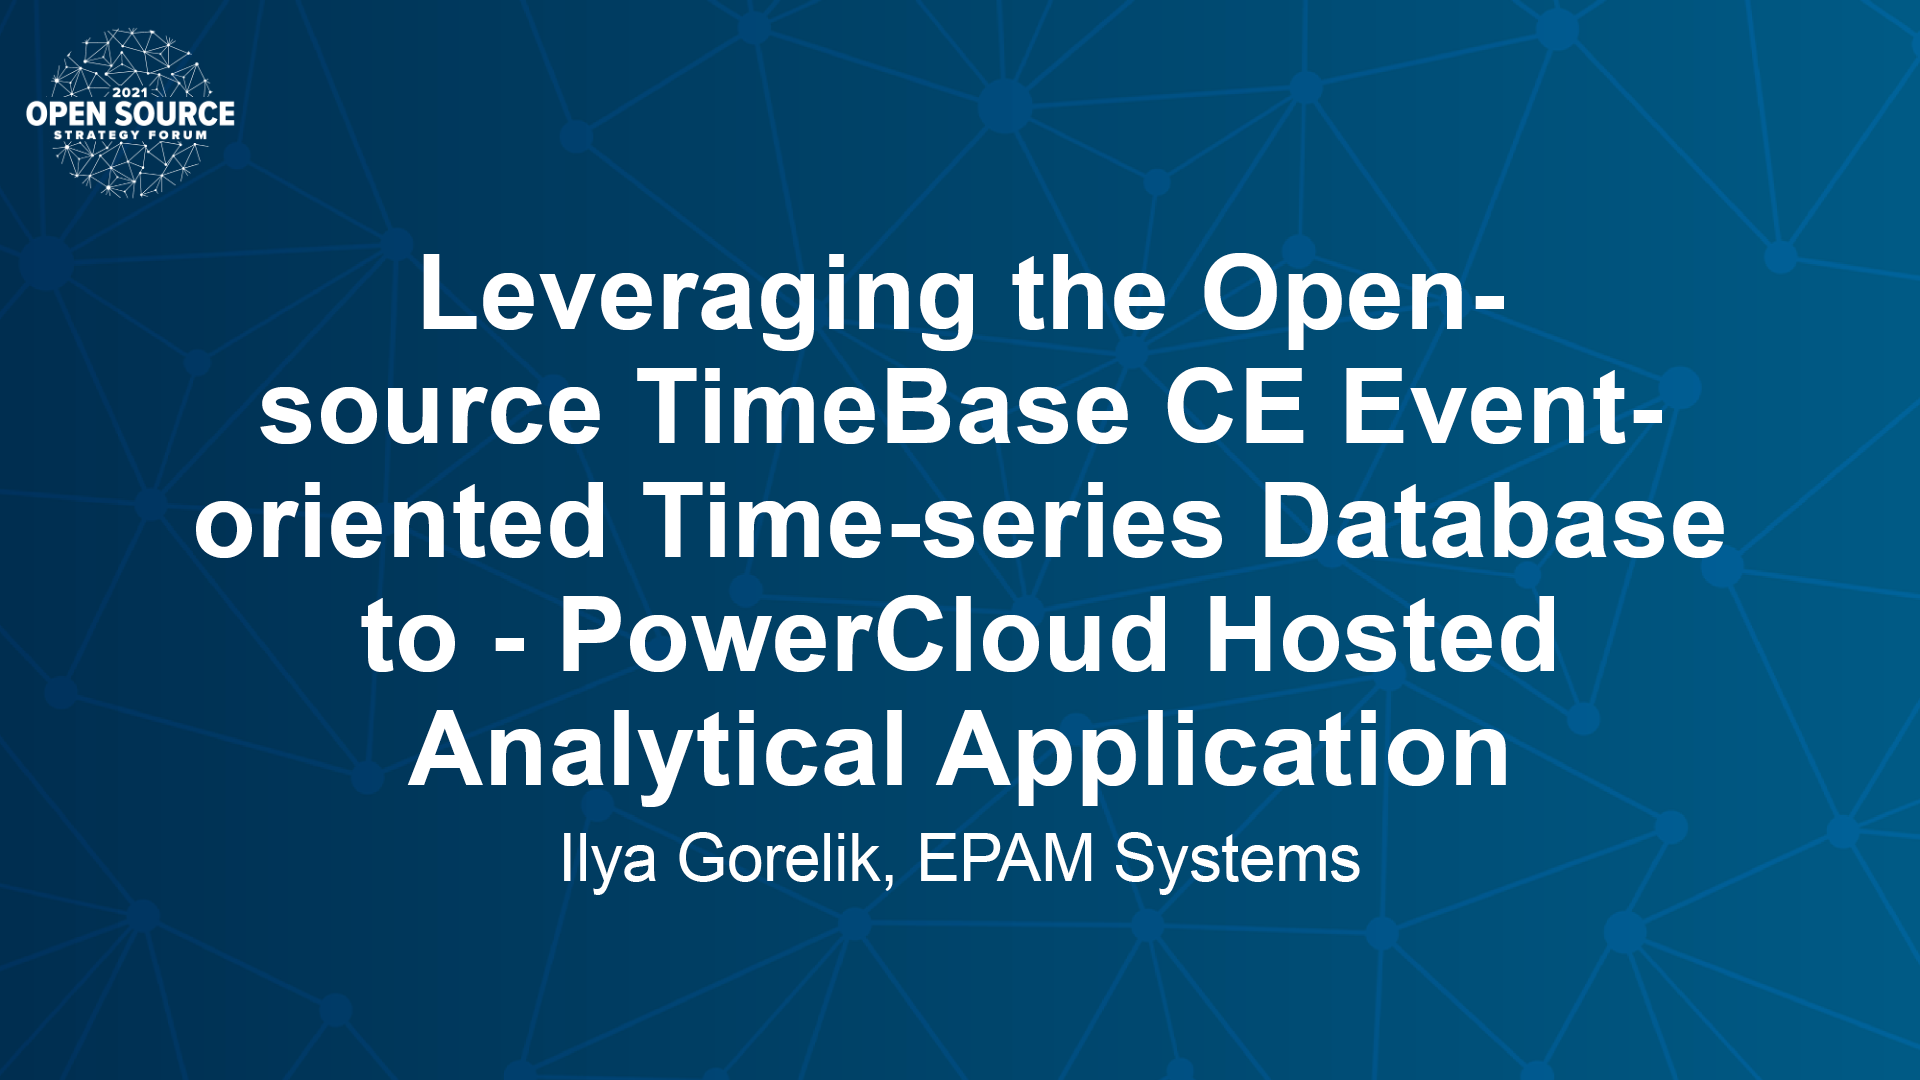 Leveraging the Open-source TimeBase CE to PowerCloud Hosted Analytical Application – Ilya Gorelik 2021